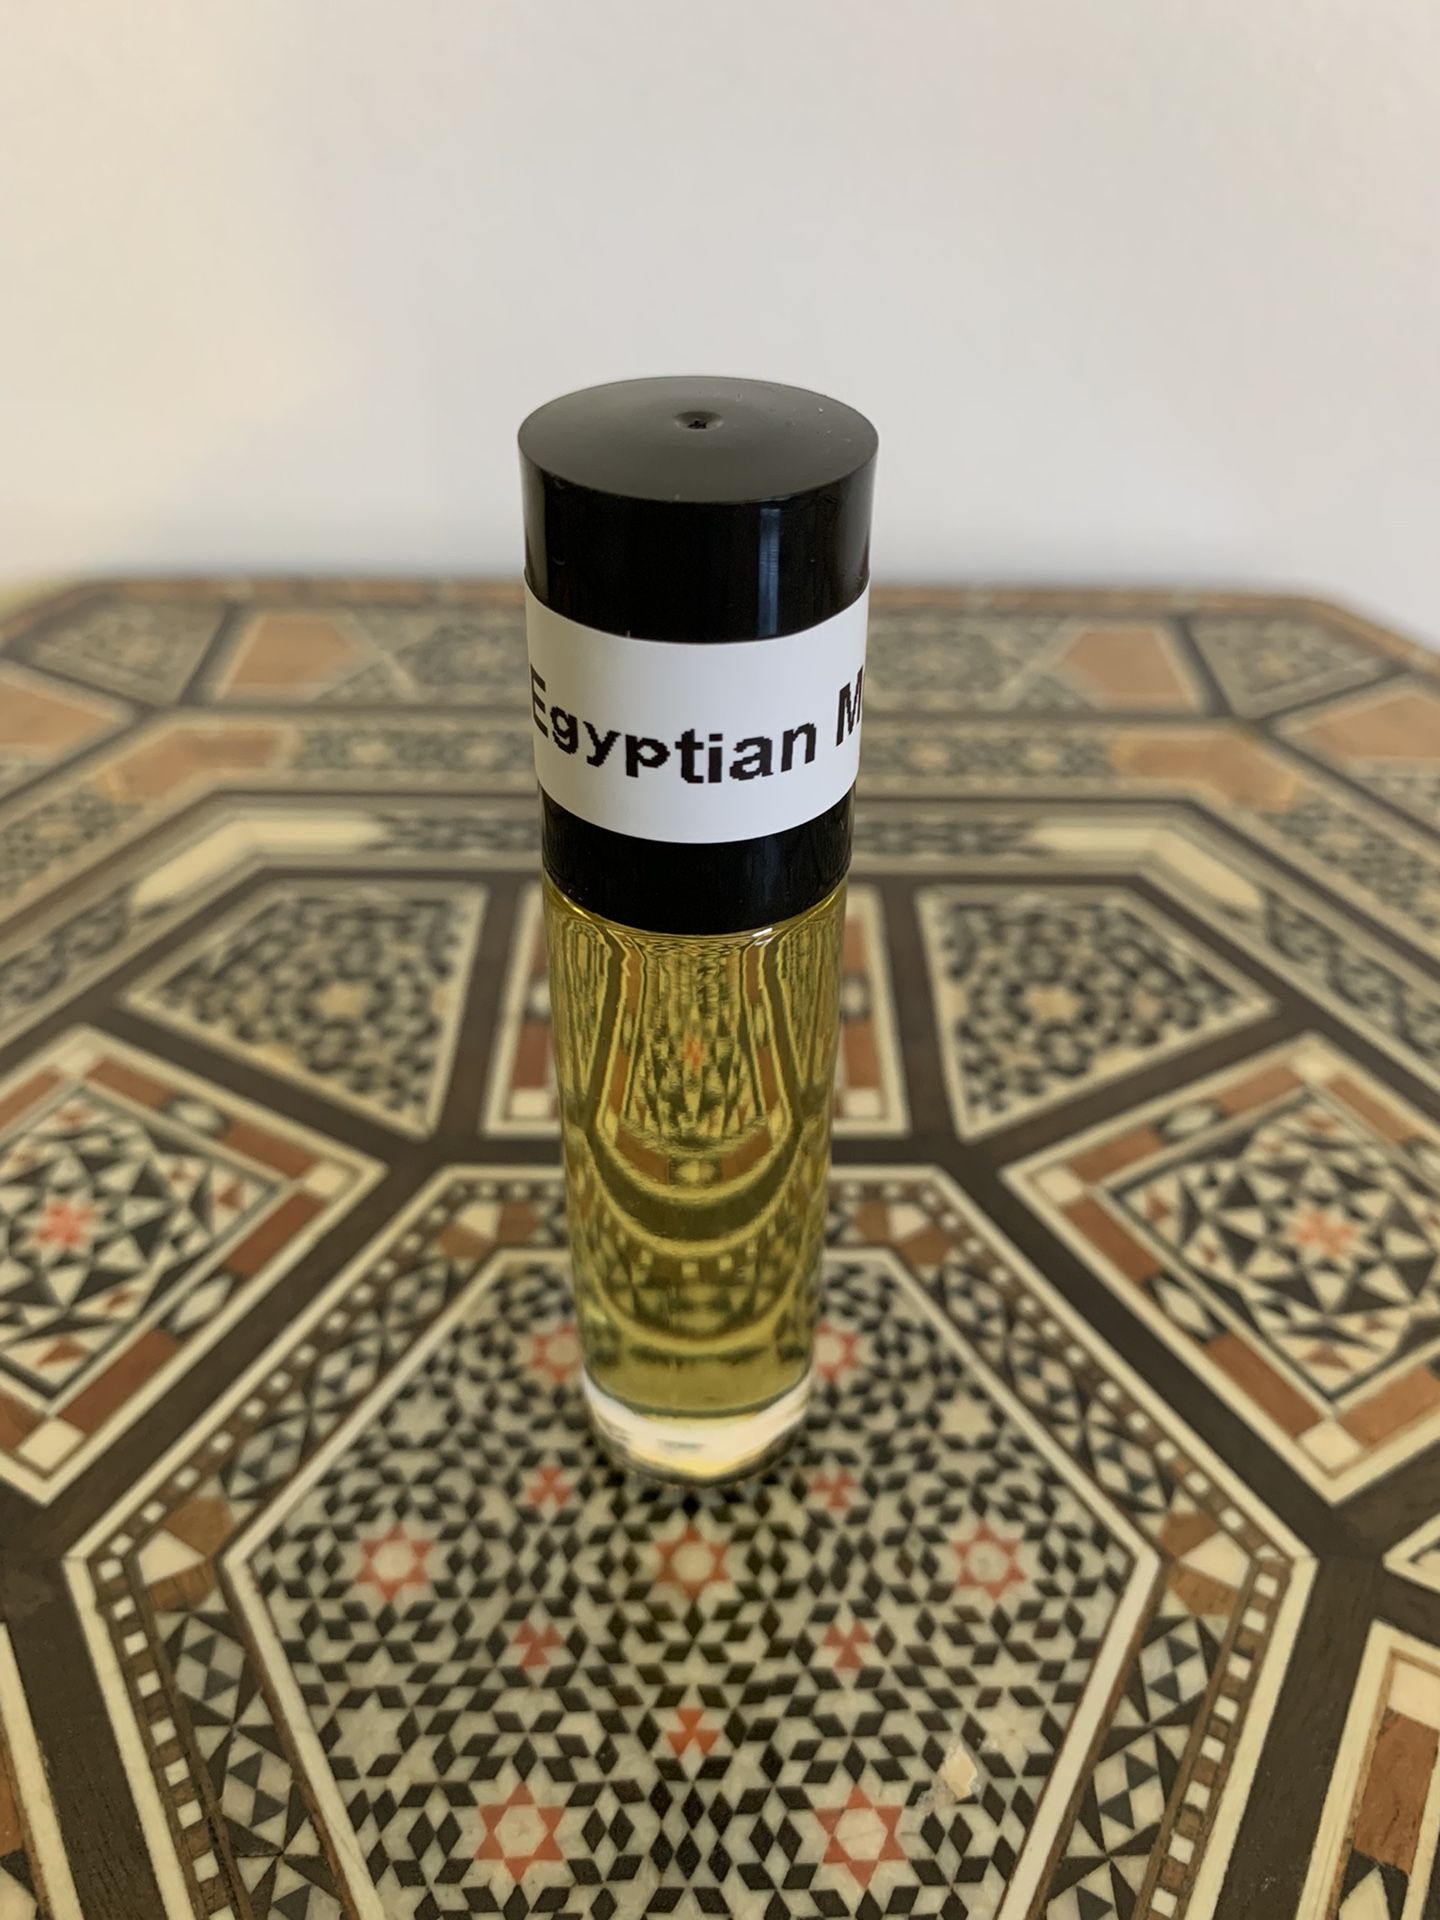 Egyptian Musk (Original) Body Oil - Uncut- Concentrated Fragrance 1 Oz (30ml)